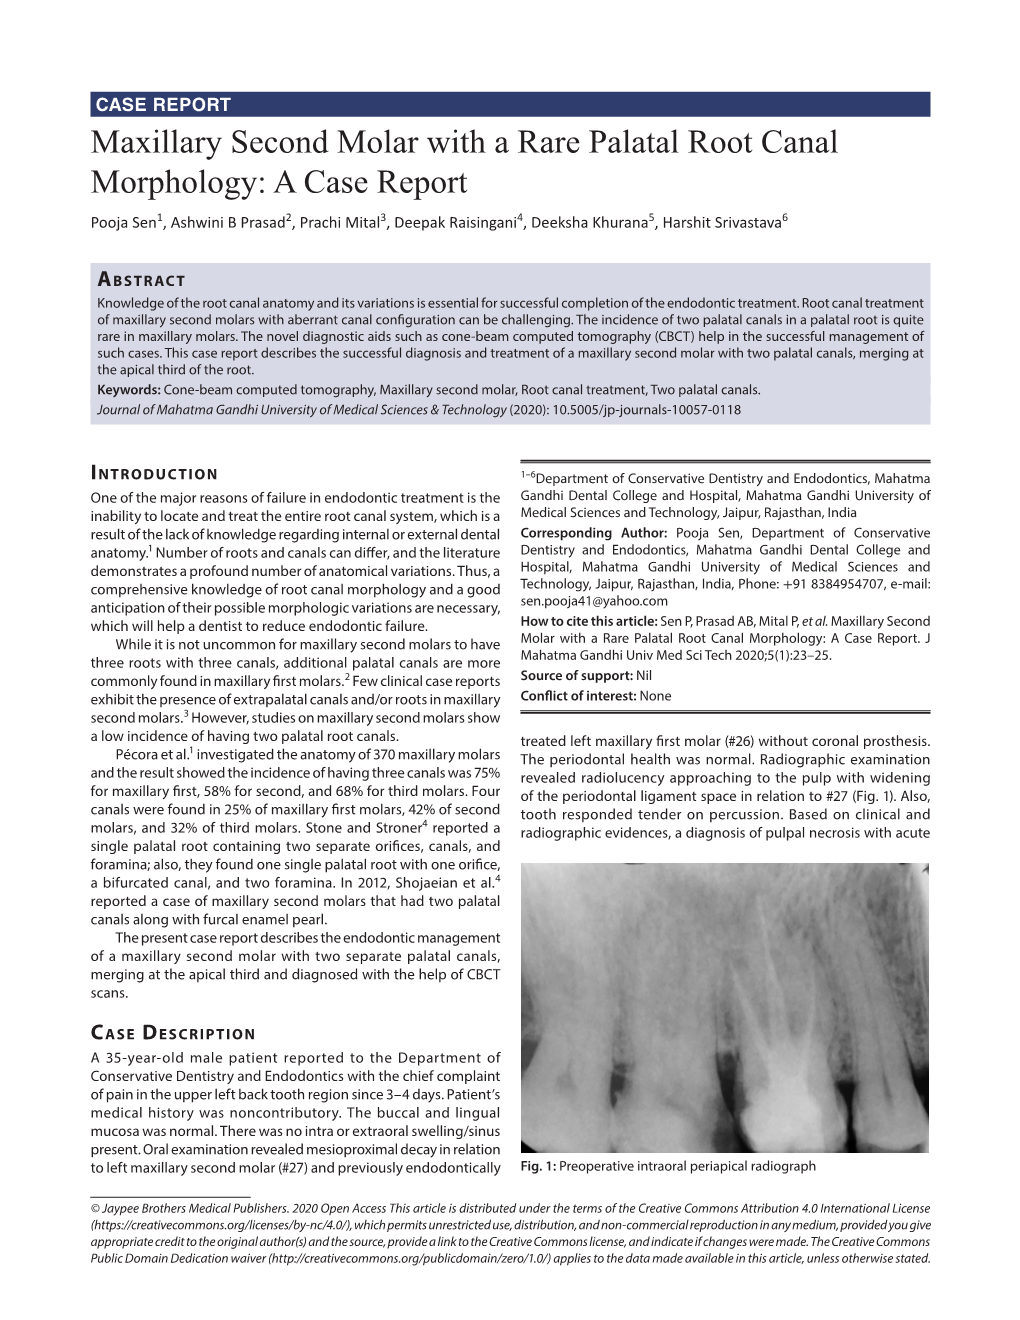 Maxillary Second Molar with a Rare Palatal Root Canal Morphology: A